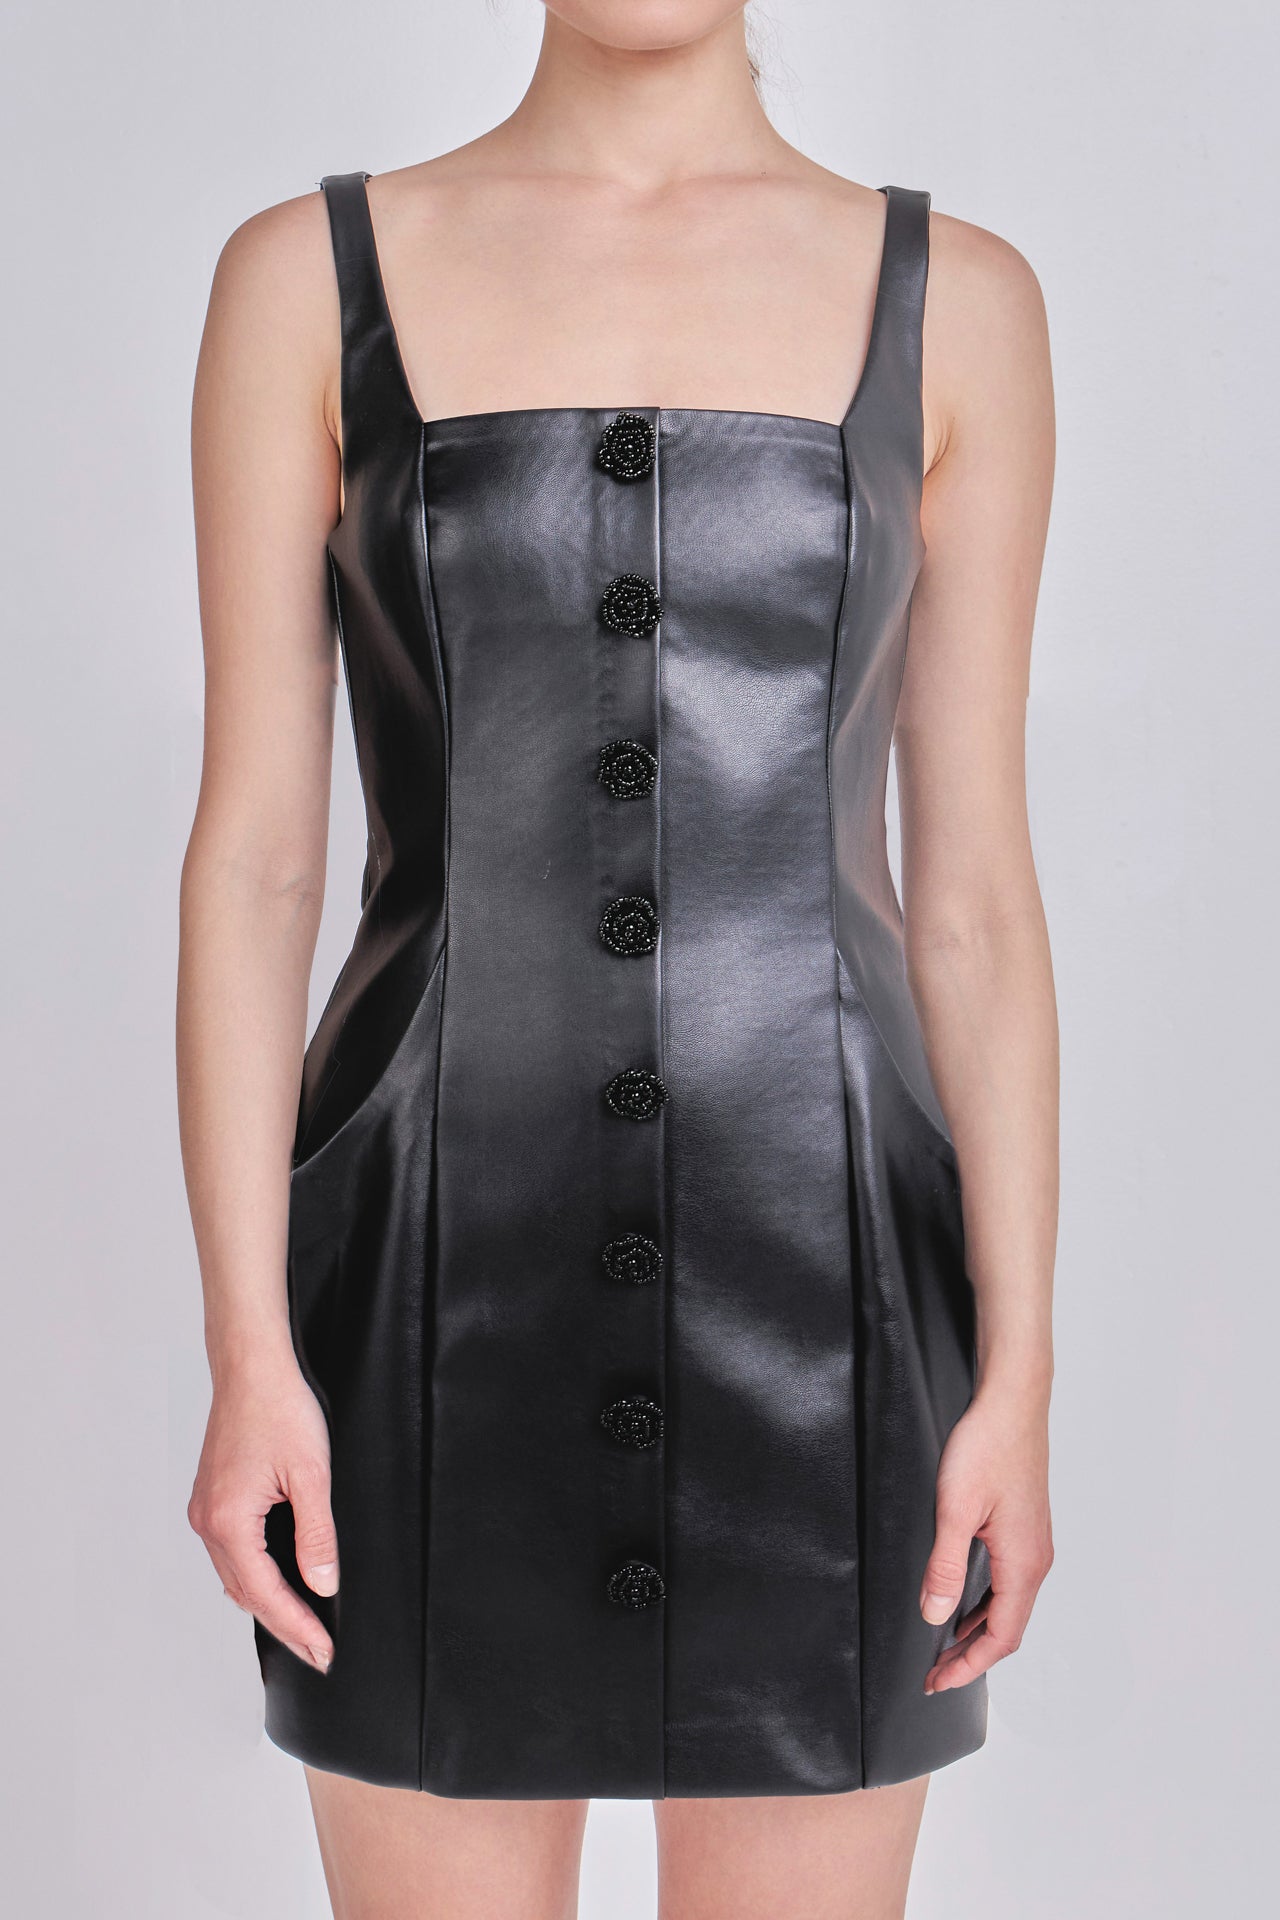 Endless Rose - Faux Leather Buttoned Mini Dress - Dresses in Women's Clothing available at endlessrose.com